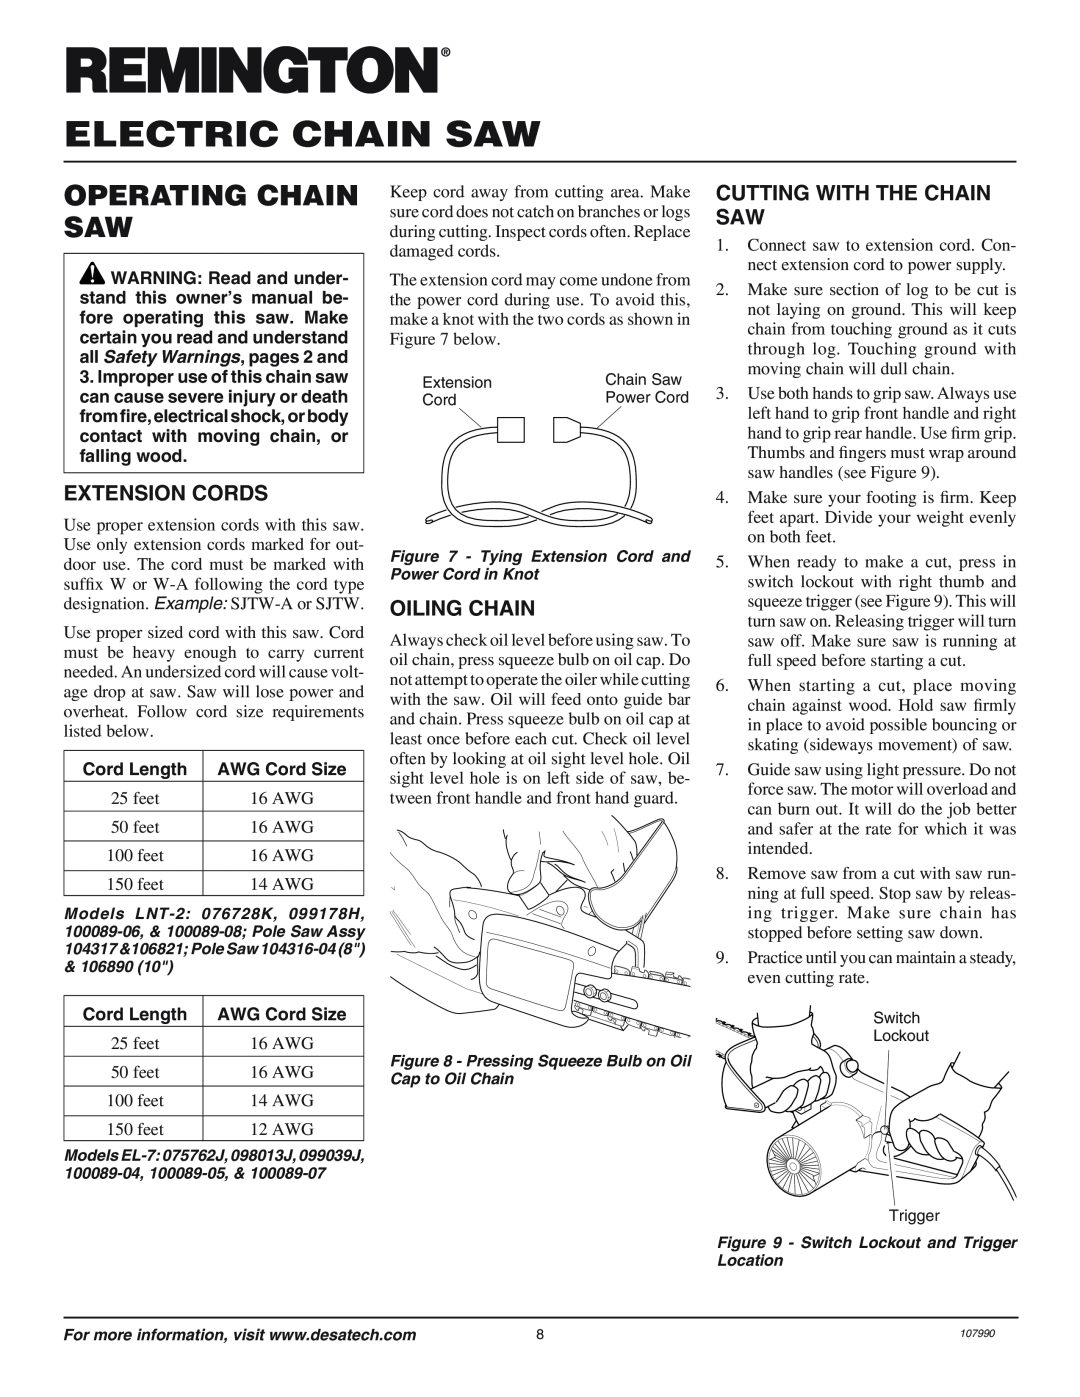 Remington owner manual Operating Chain Saw, Extension Cords, Oiling Chain, Cutting With The Chain Saw, Electric Chain Saw 